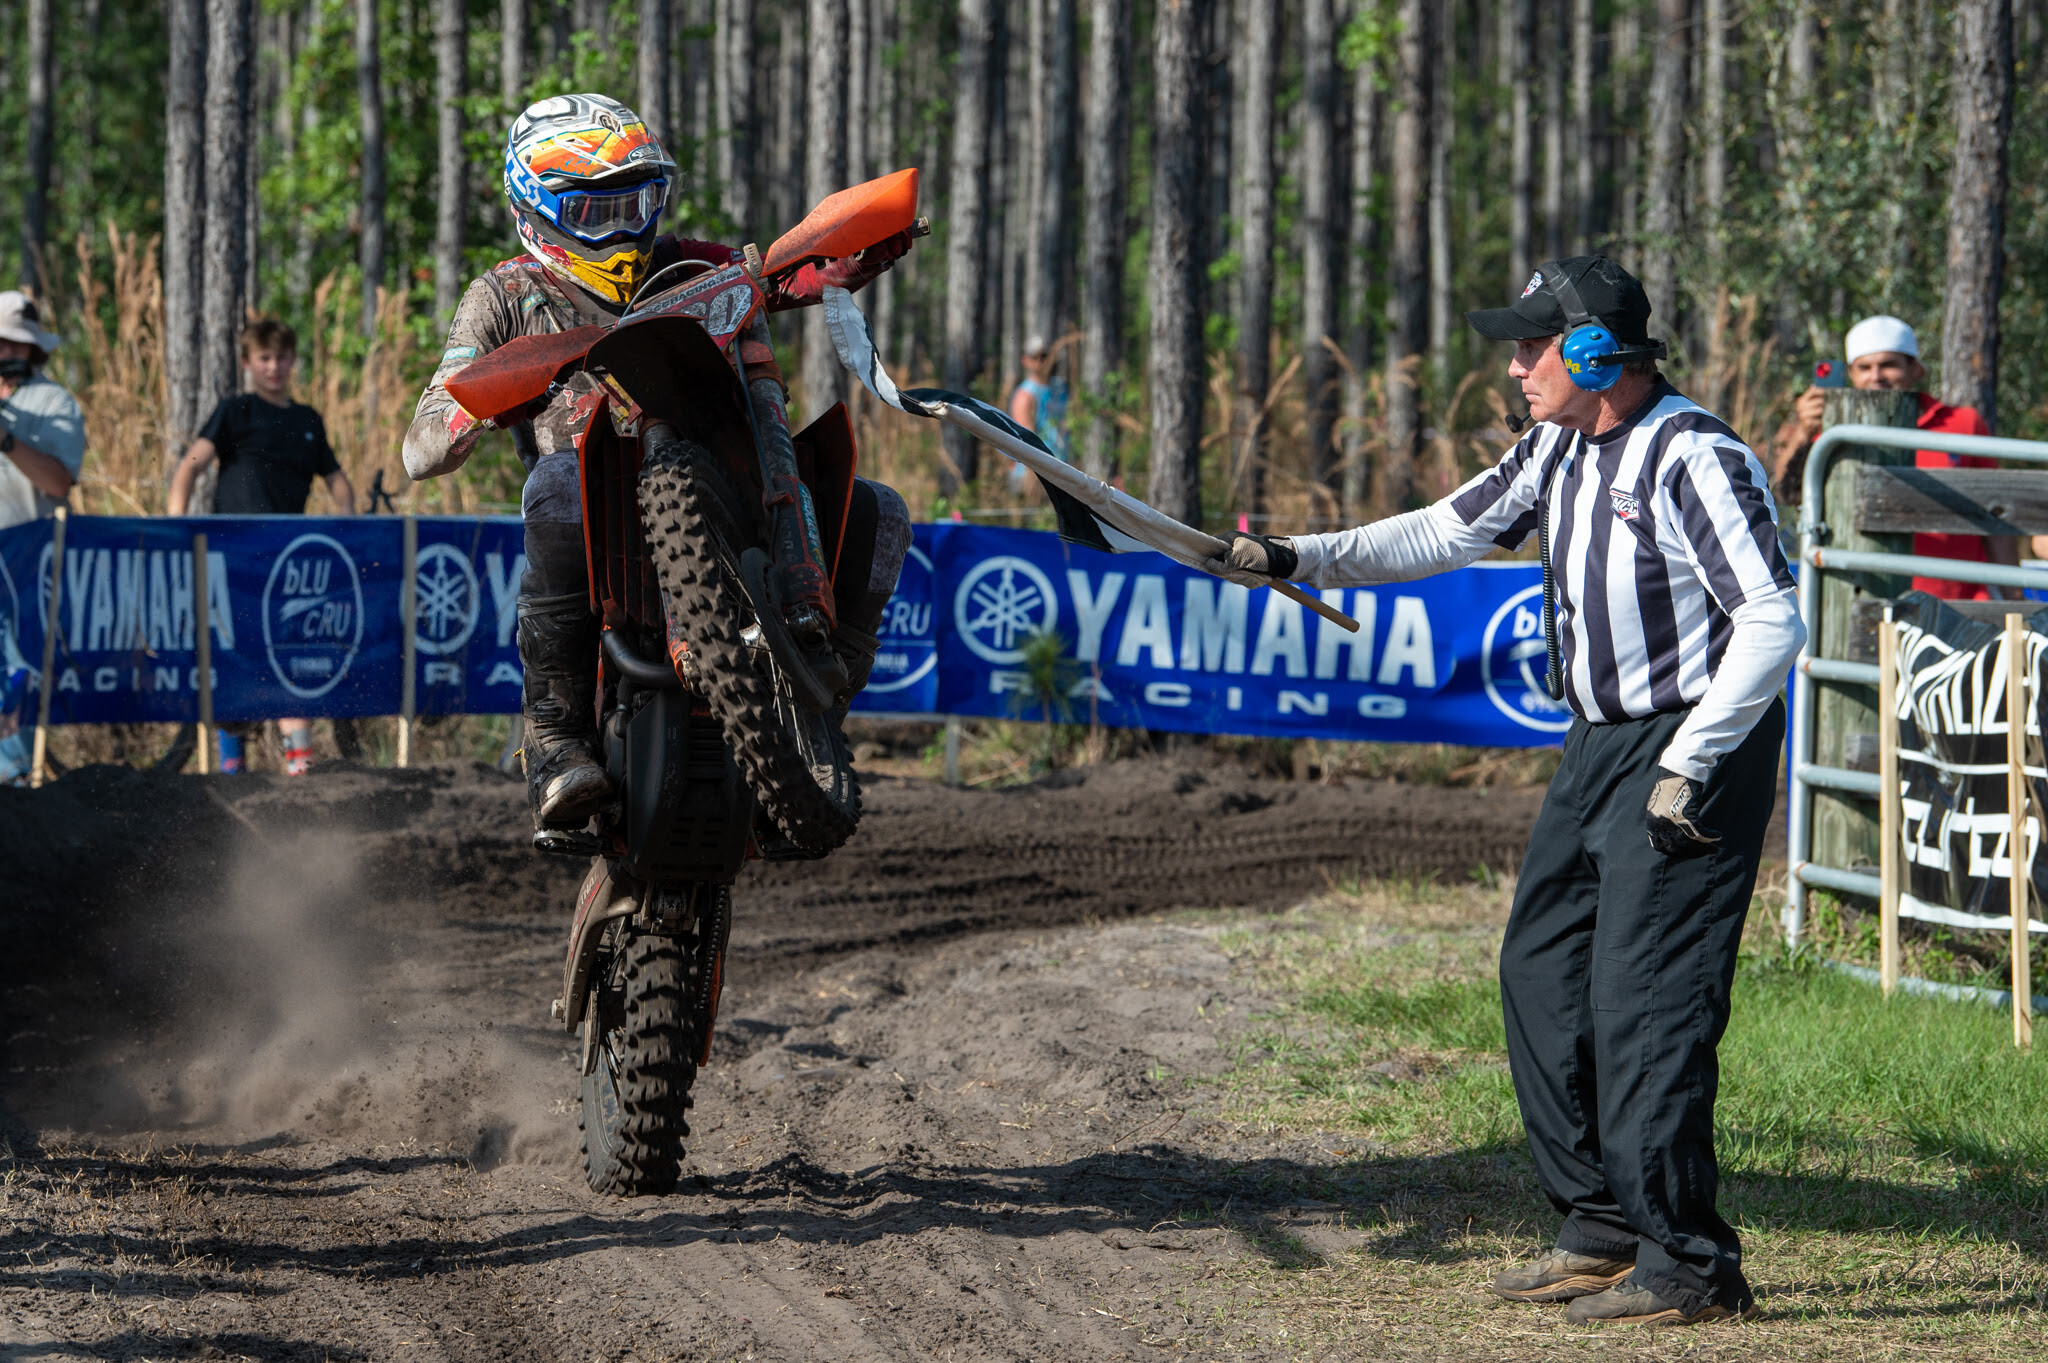 Ben Kelley (FMF/KTM Factory Racing) clinched his first win since returning from injury.